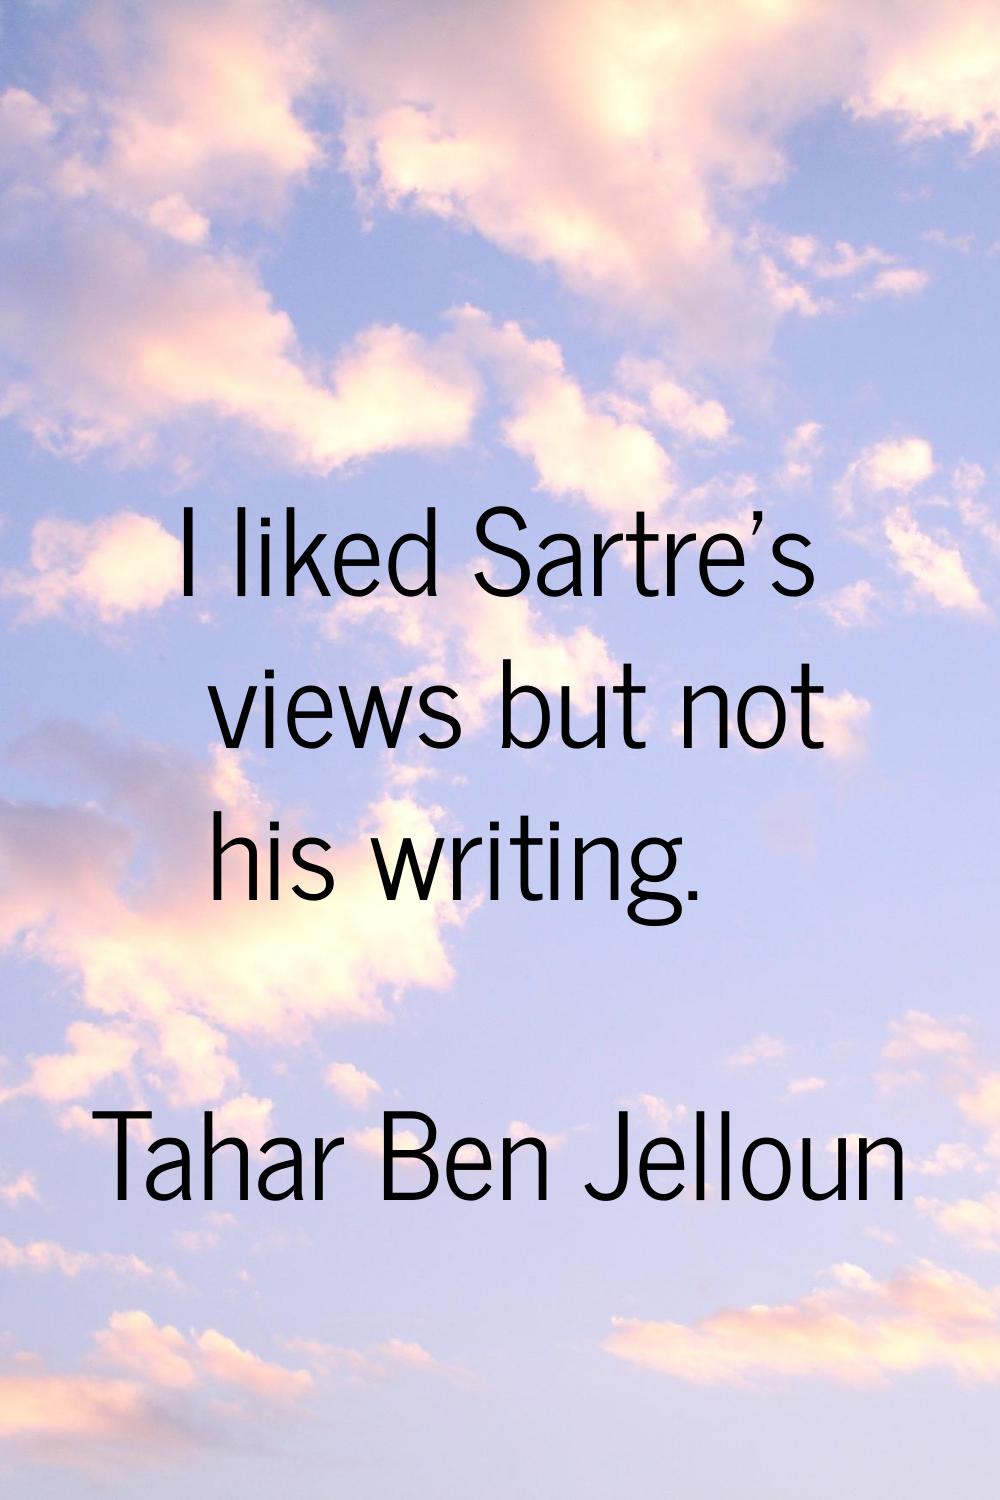 I liked Sartre's views but not his writing.